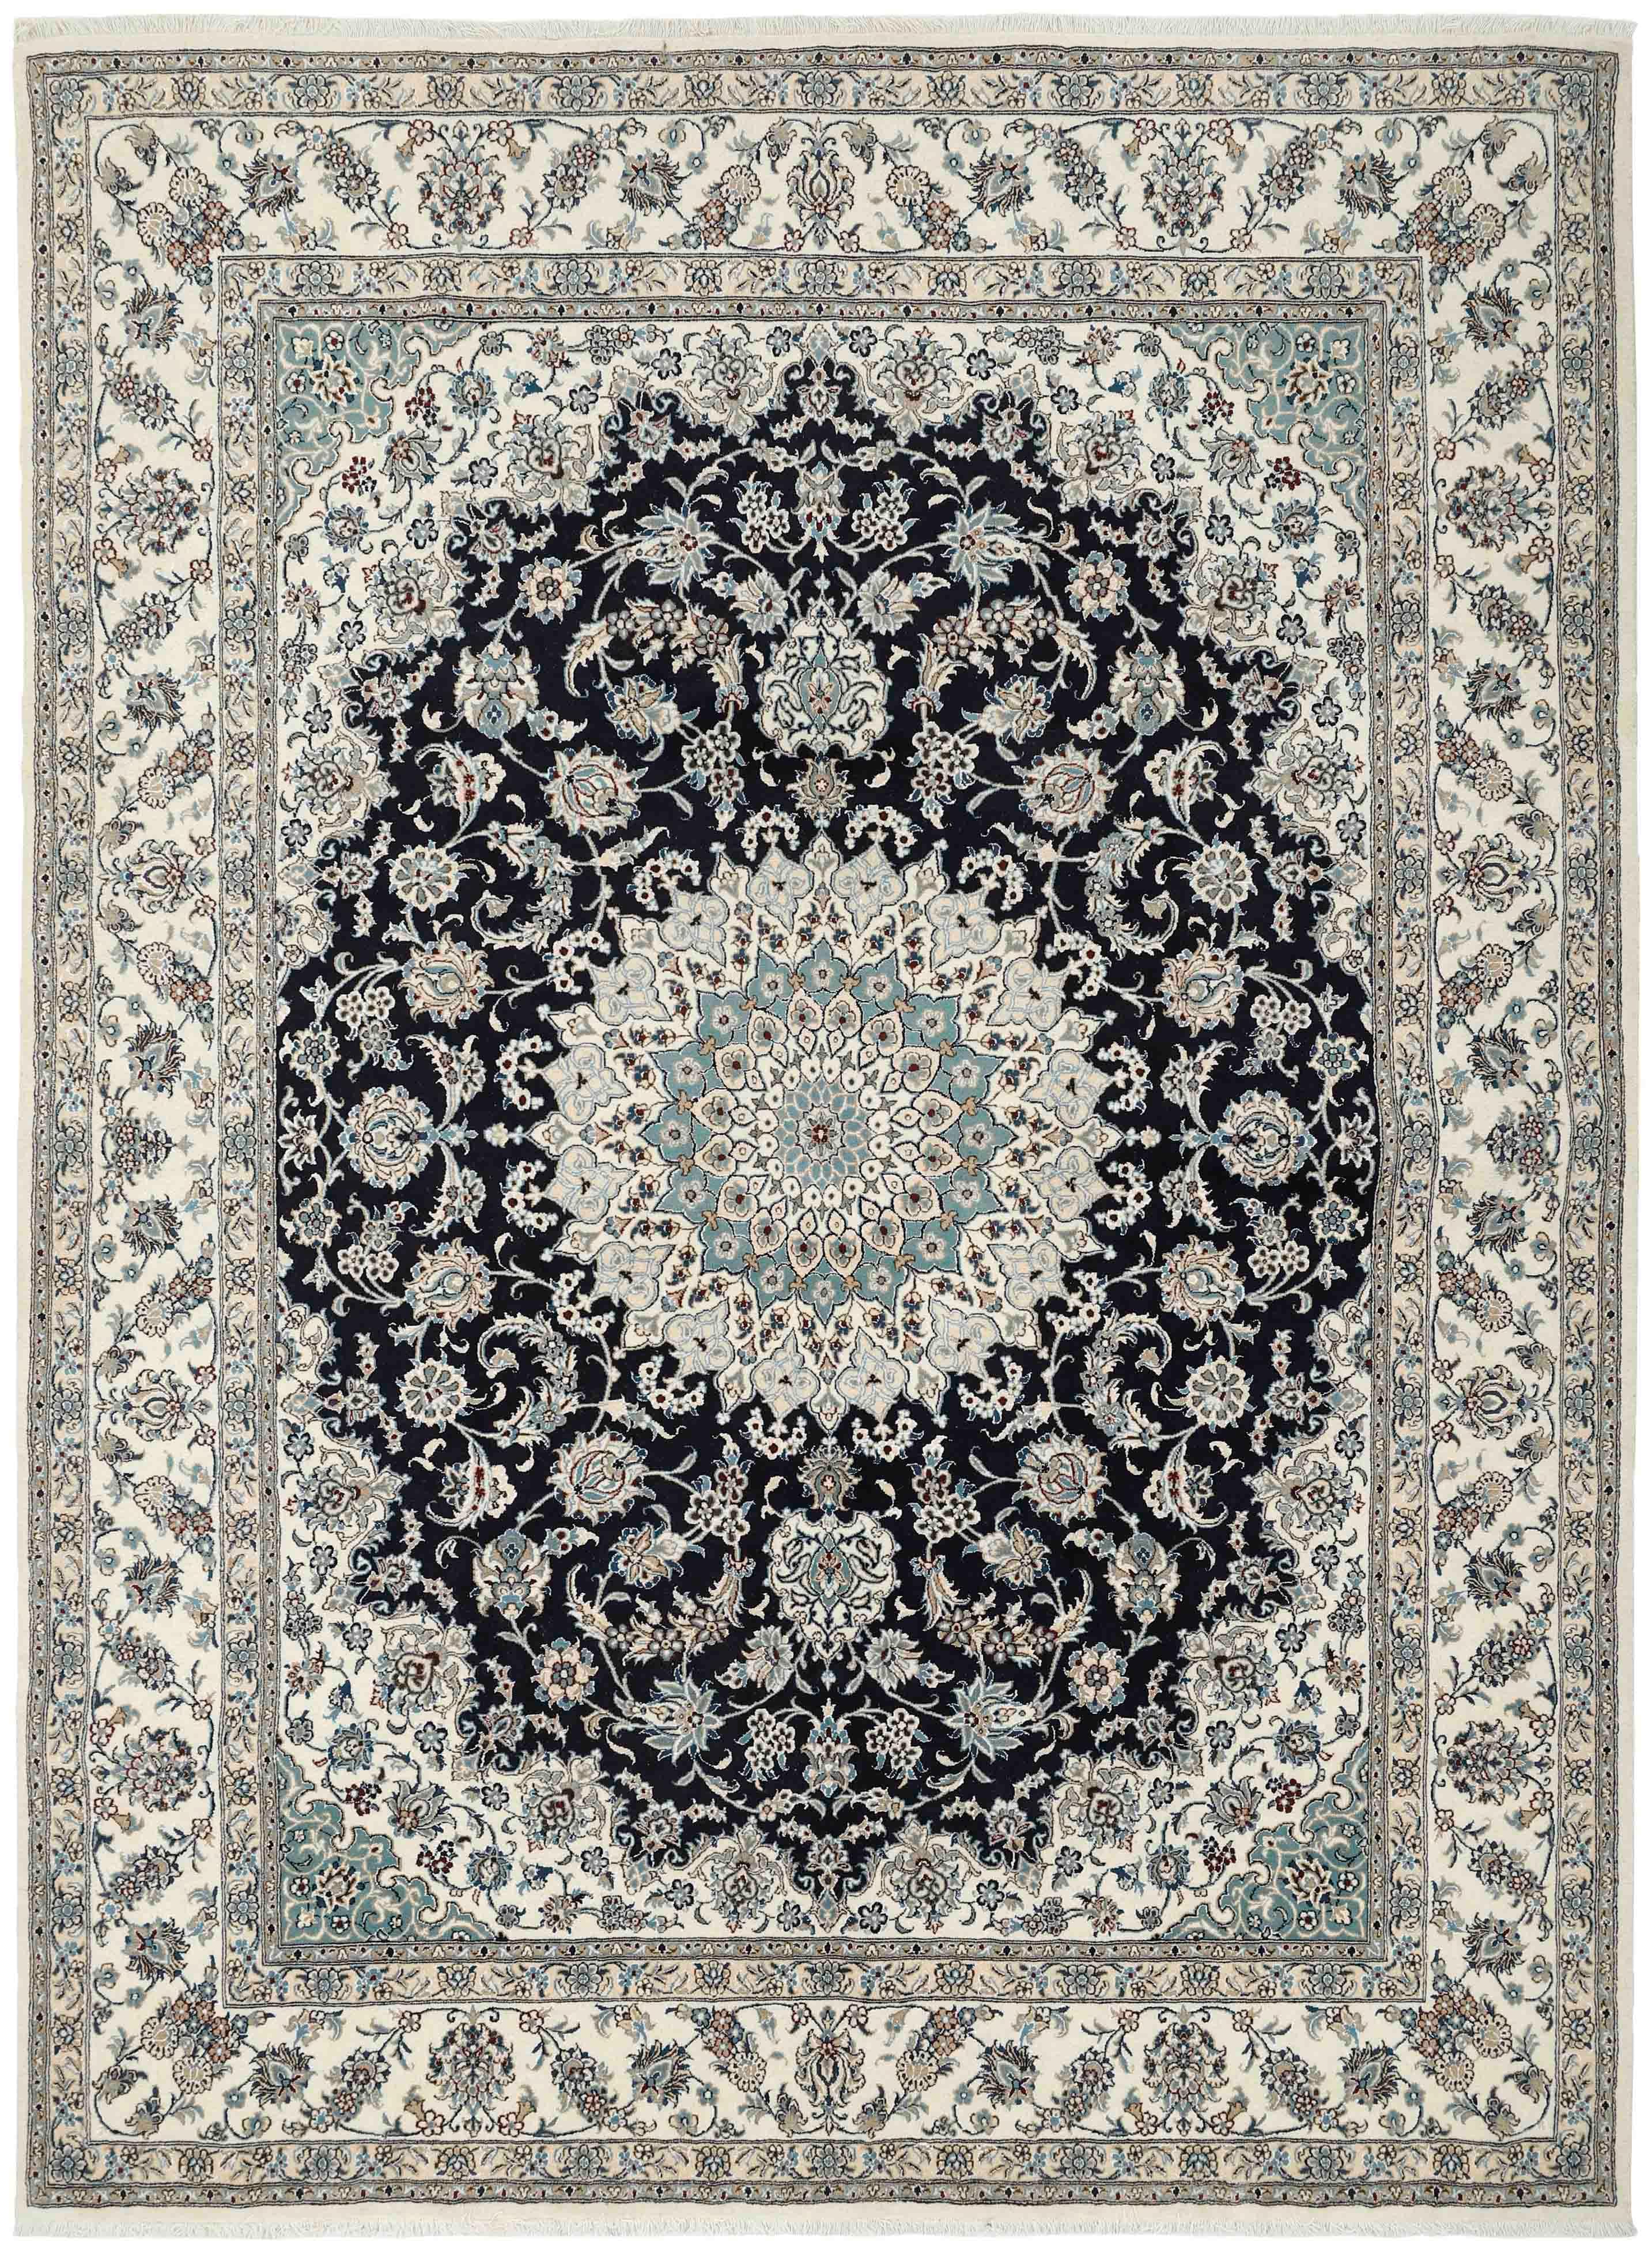 Authentic persian rug with a traditional floral design in cream, blue and black